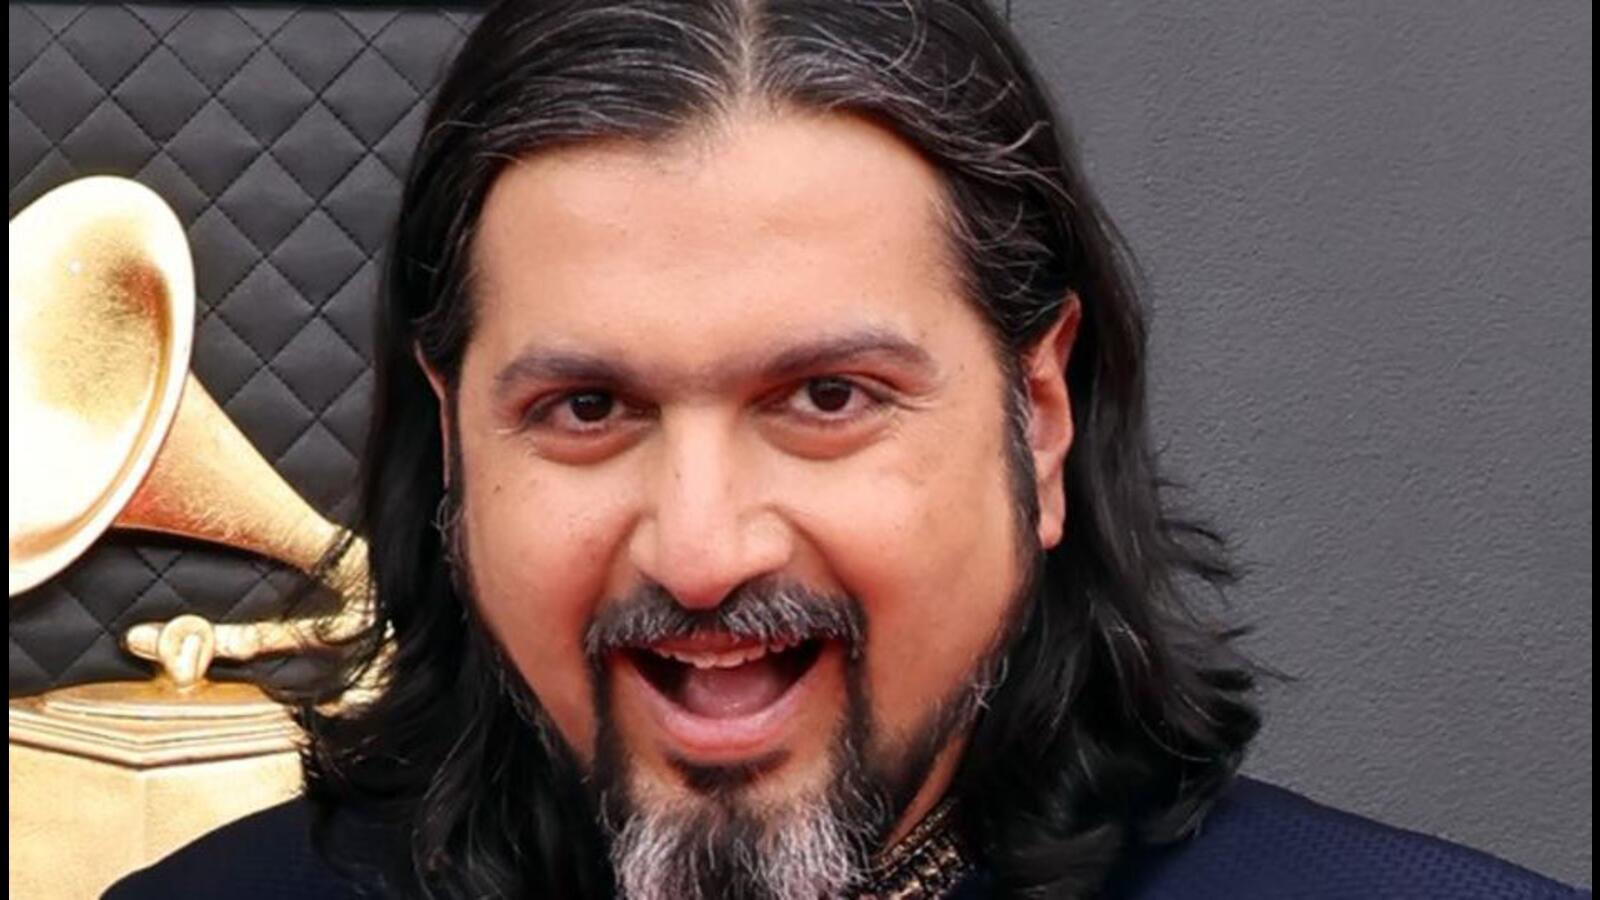 #IndiaAtCannes | Ricky Kej: I’m not considered to be part of mainstream music, yet government chose me for Cannes 2022